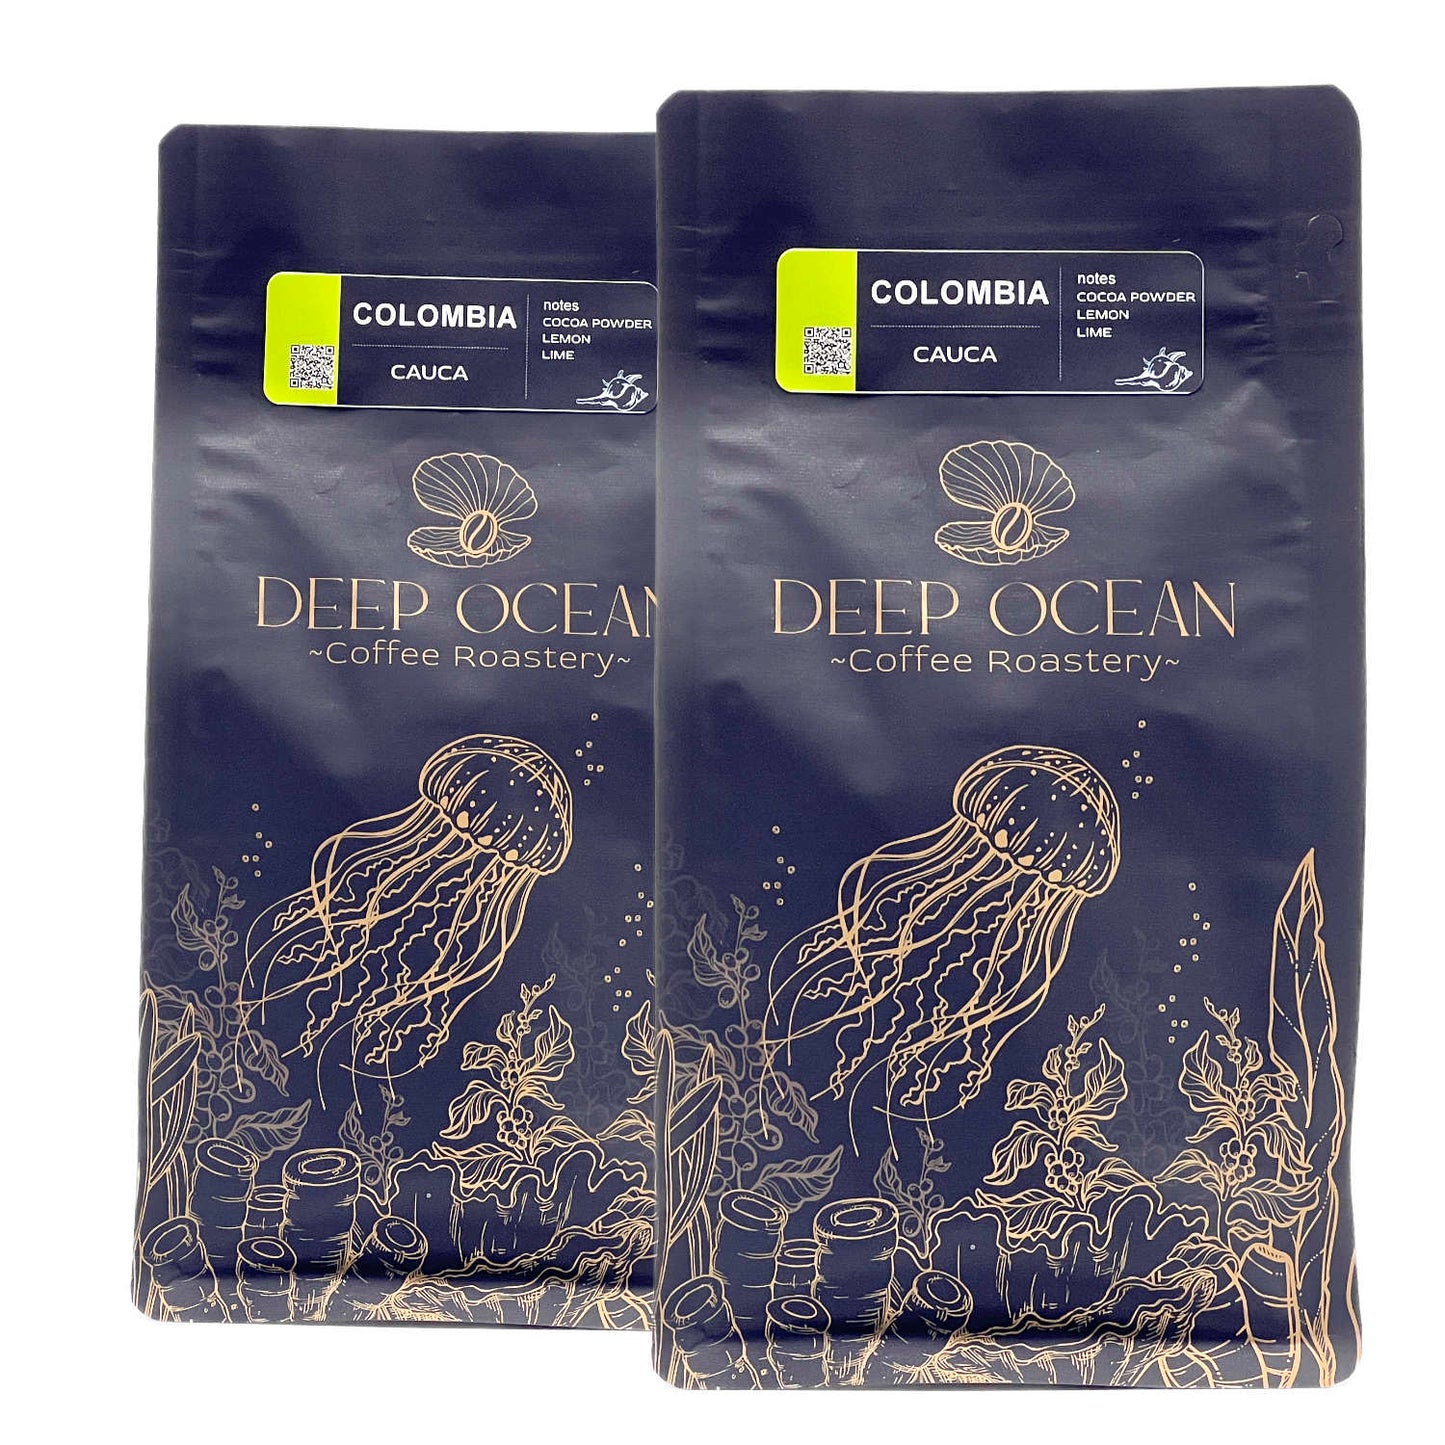 variant 2 - medium roasted coffee Colombia is great choice of specialty coffee.